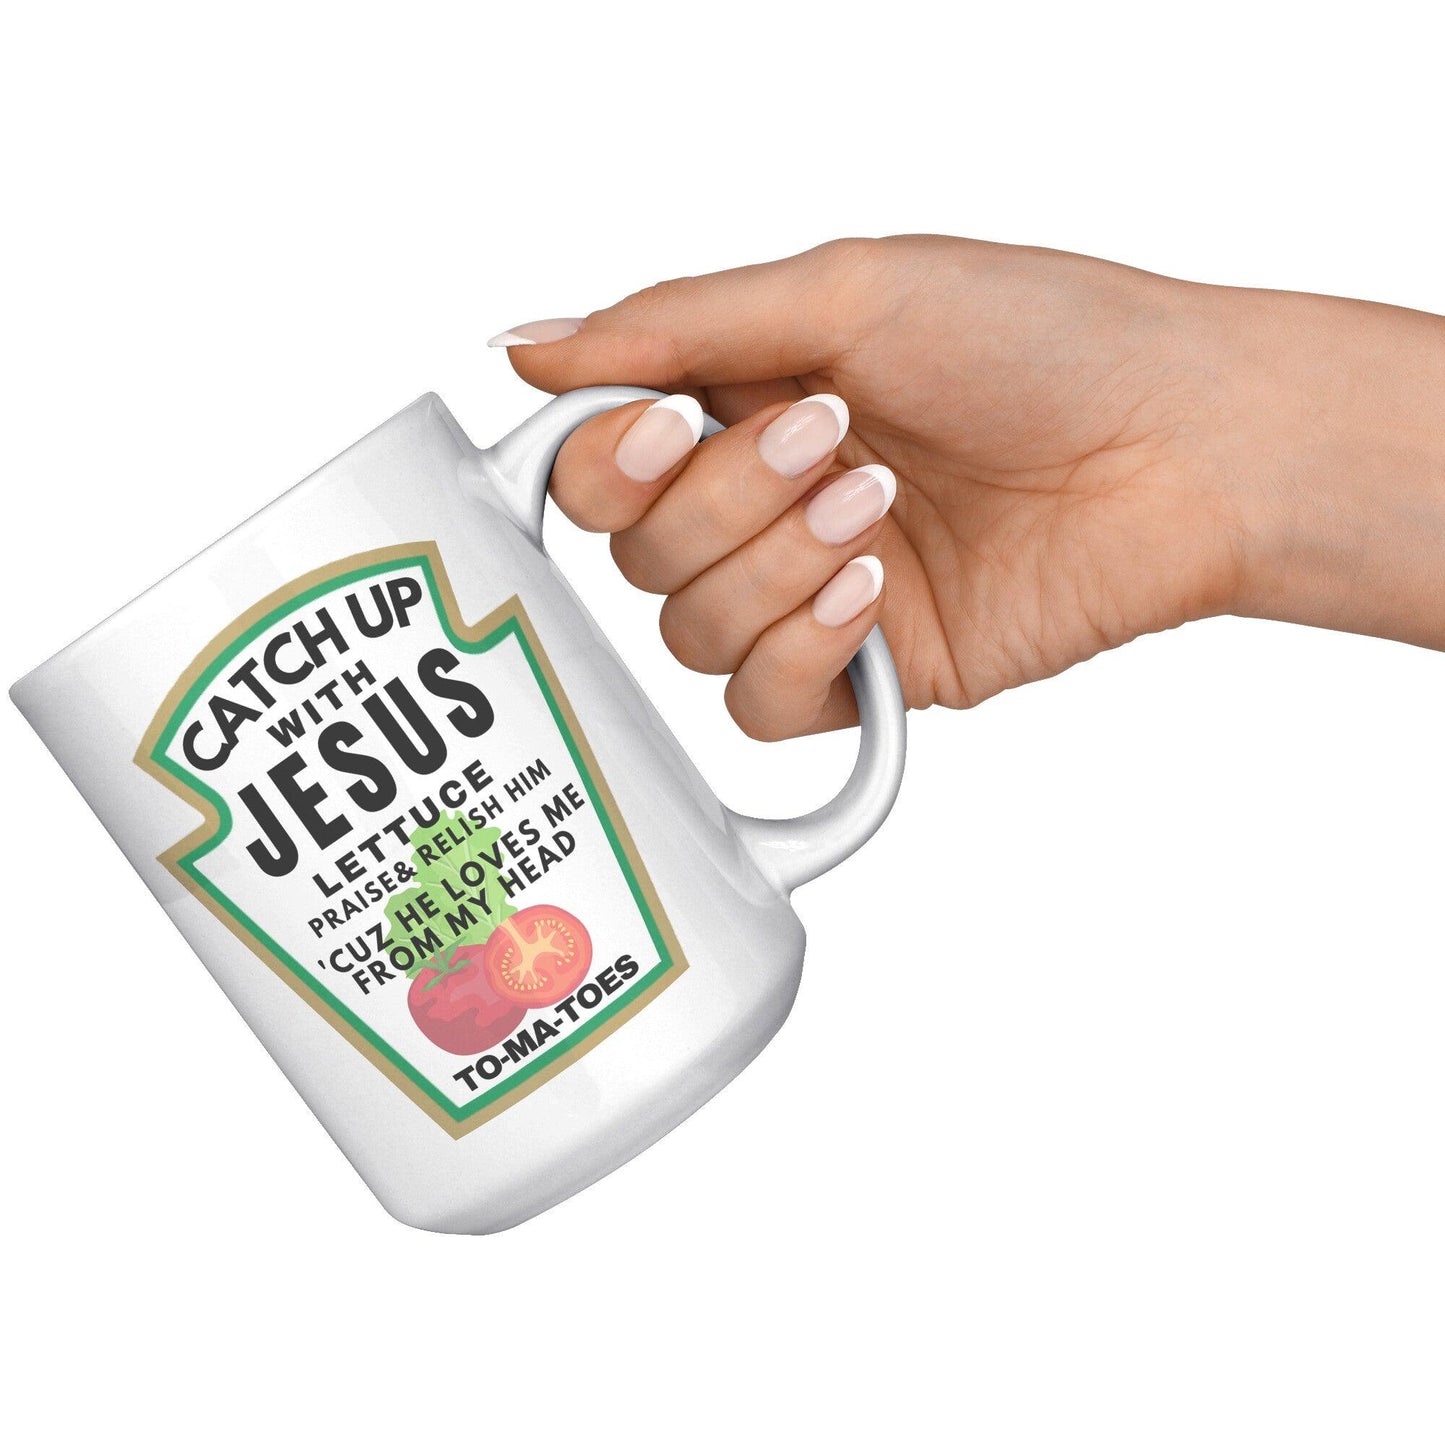 Catch Up with Jesus Lettuce Praise & Relish Him 'Cuz He Loves Me From My Head To-ma-toes White Mug - TheGivenGet